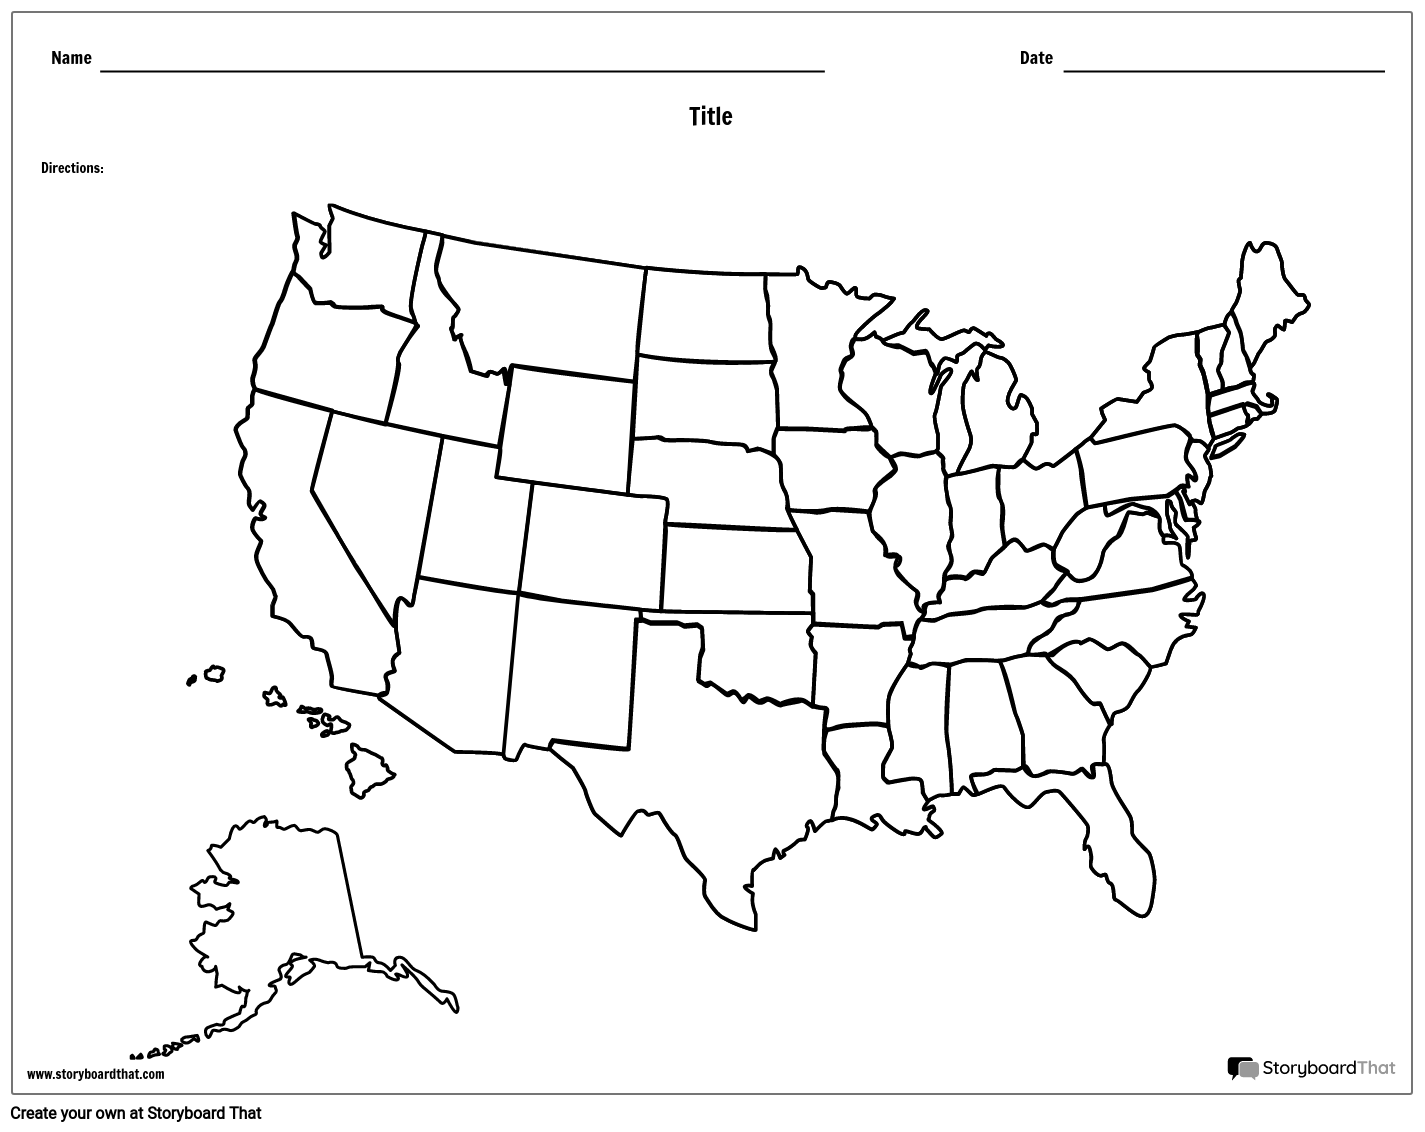 United States Map Storyboard by worksheet-templates